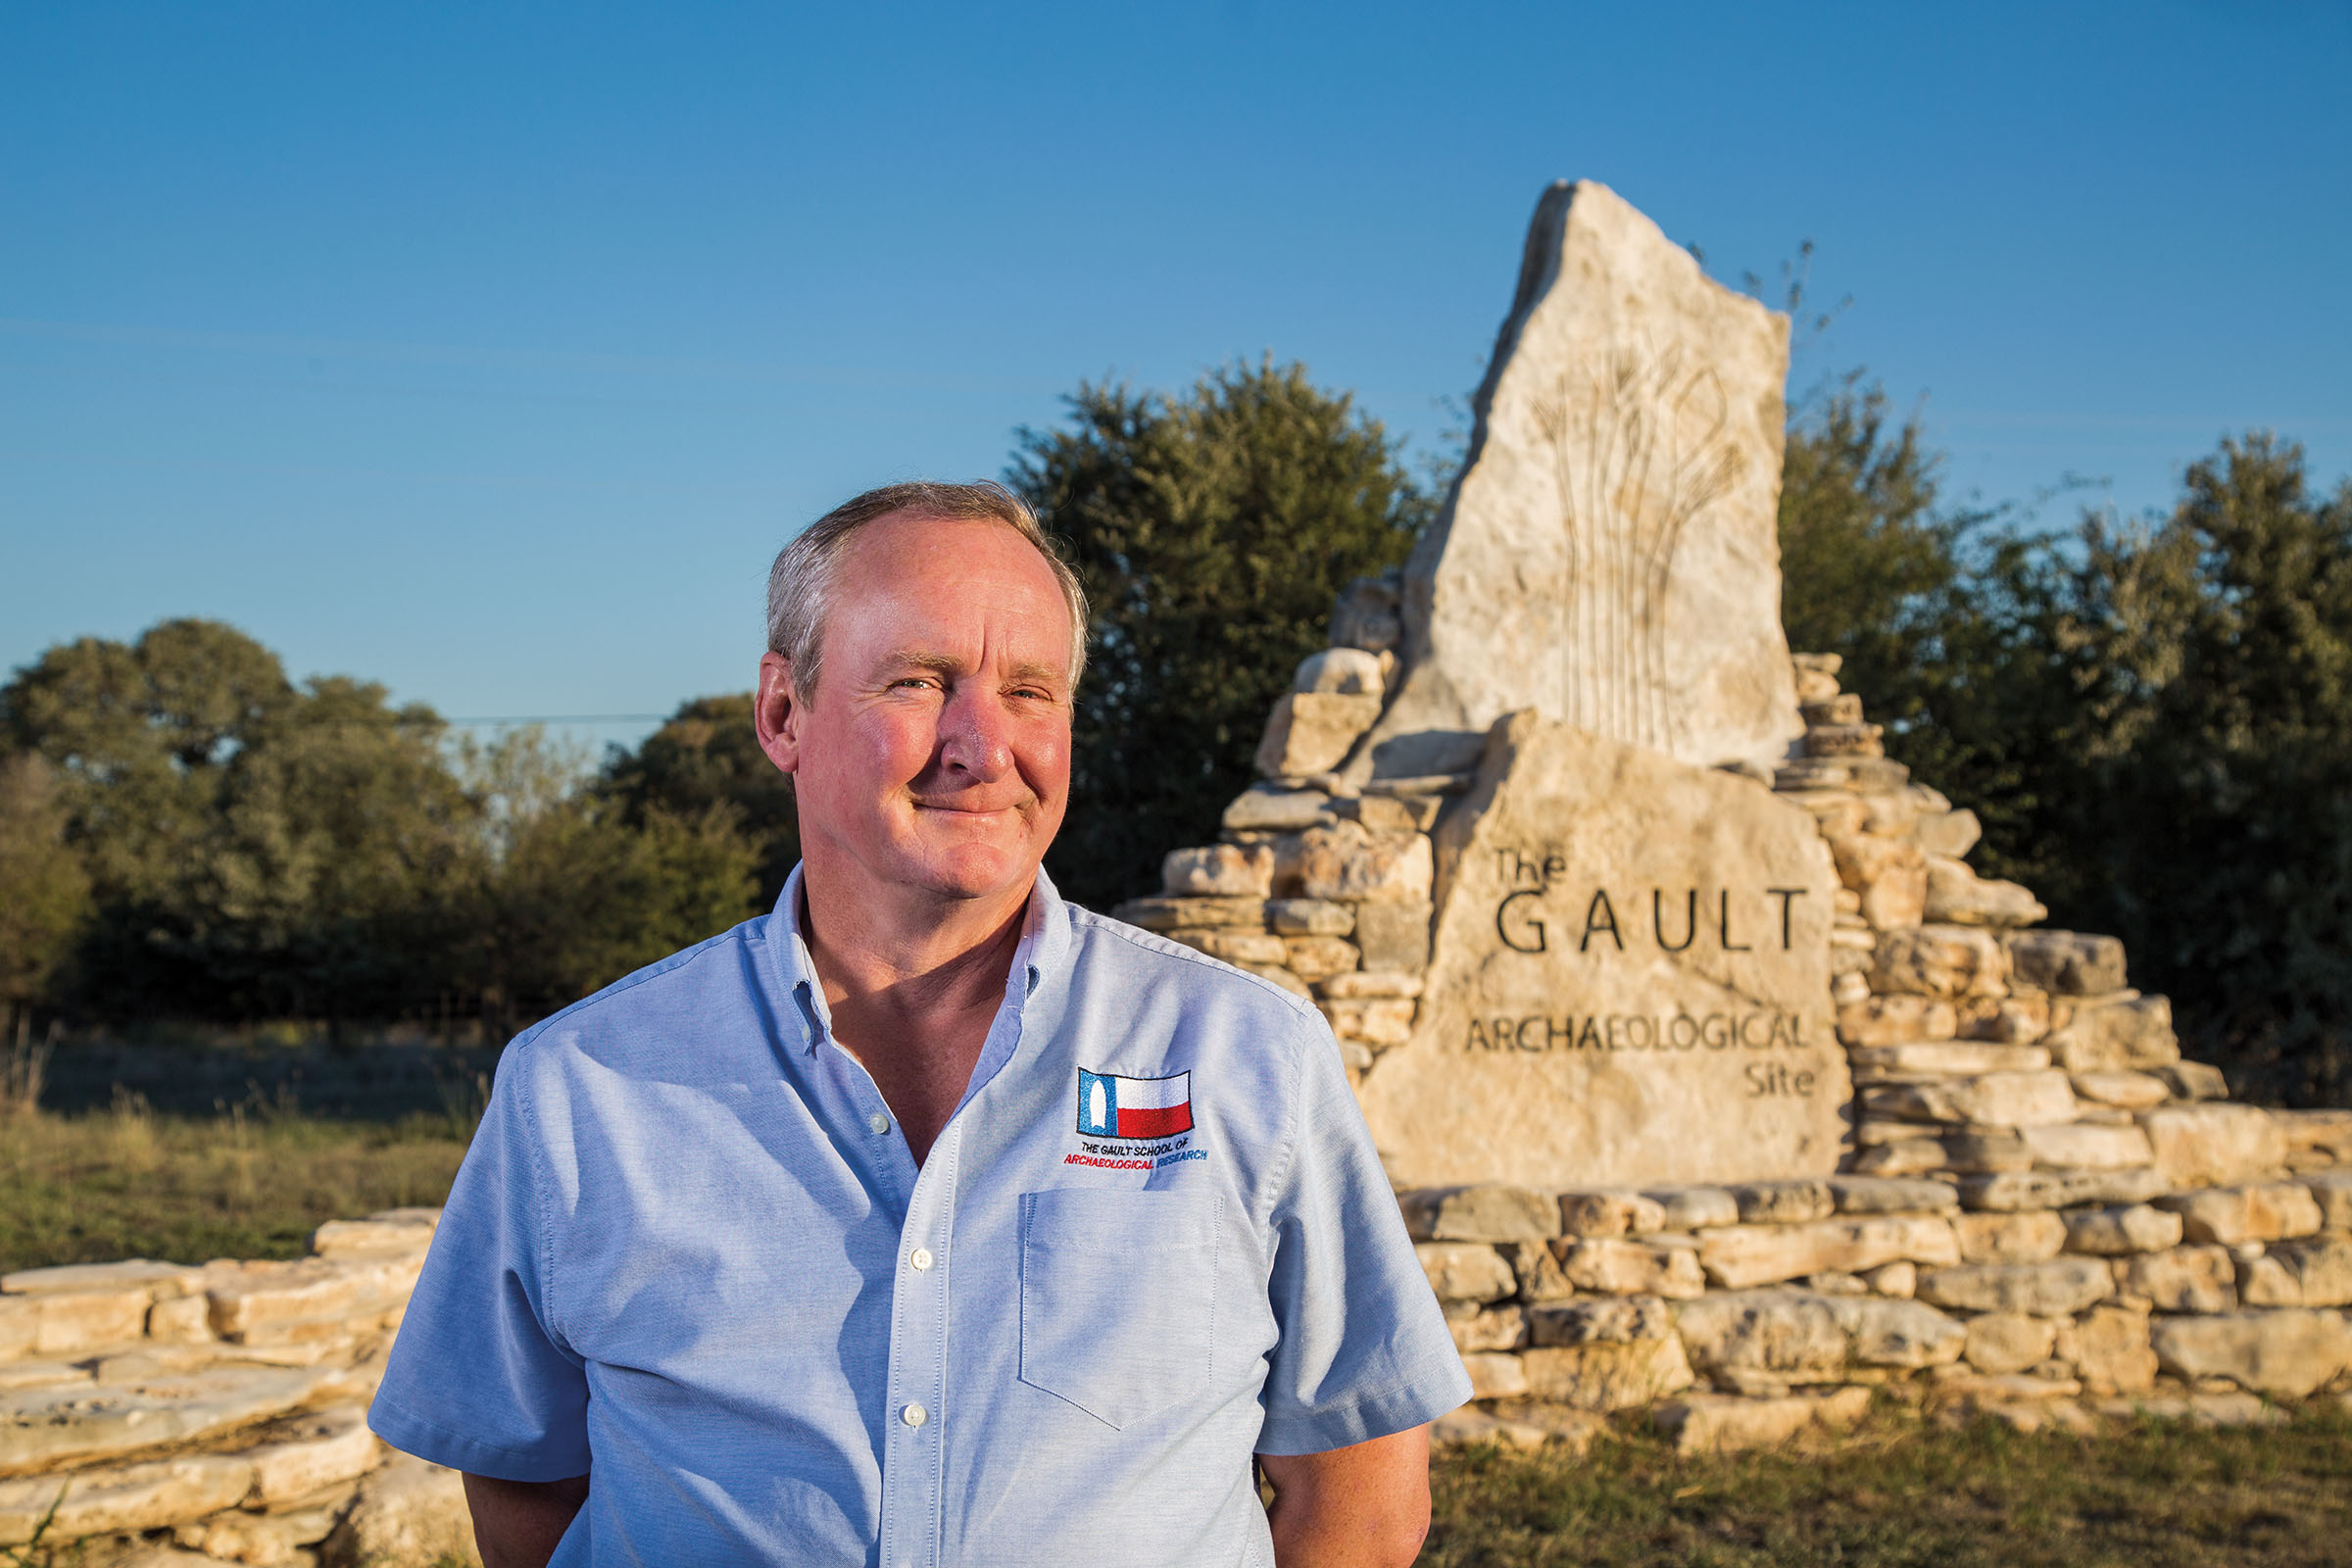 A man in a blue collared shirt stands in front of a rock formation with the word "Gault" etched into the side